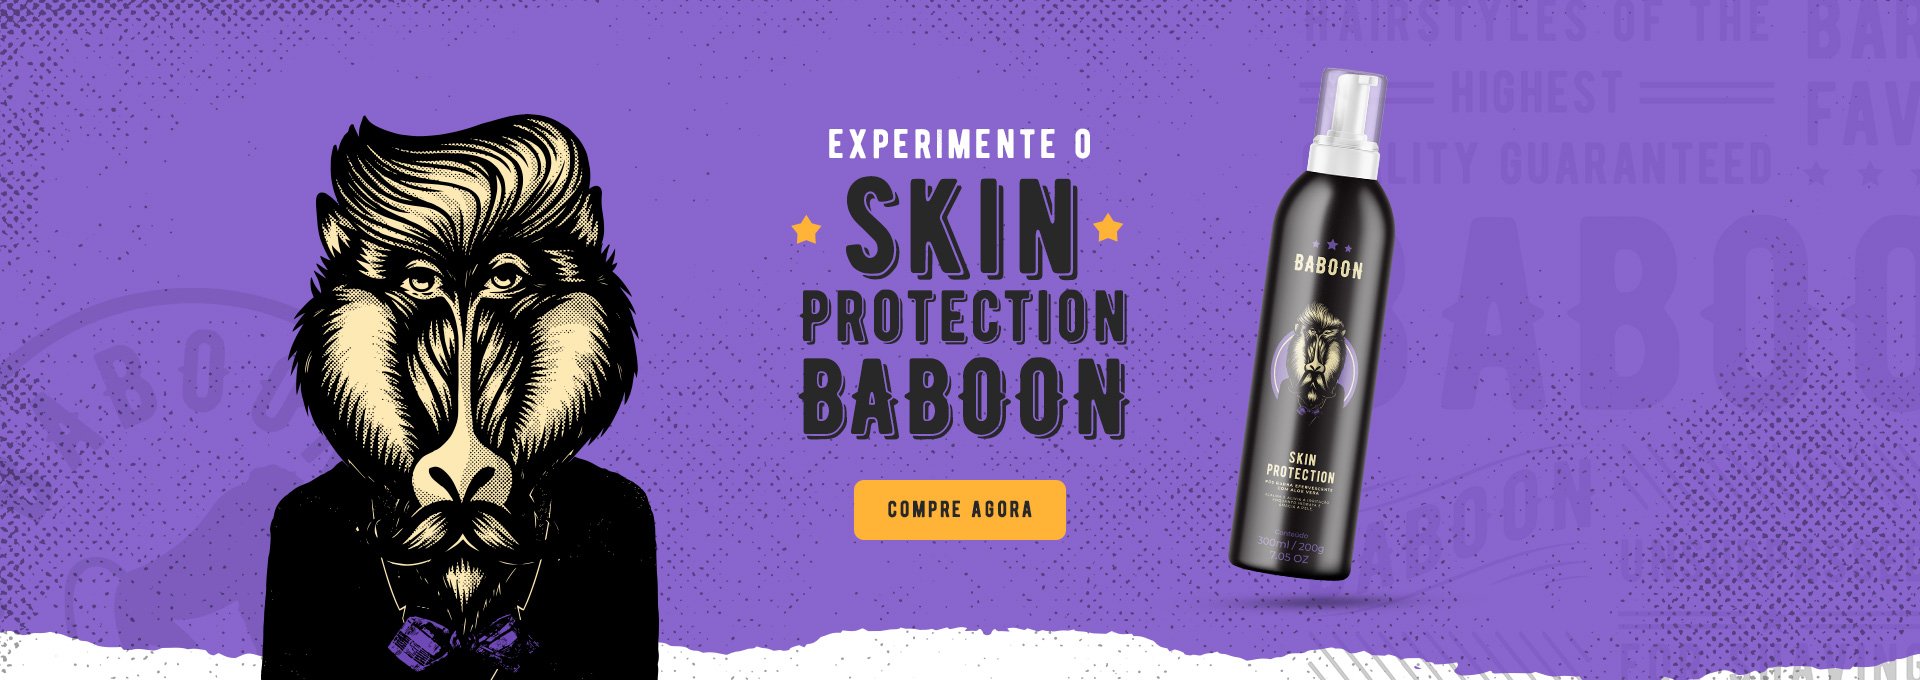 banner-skin-protection